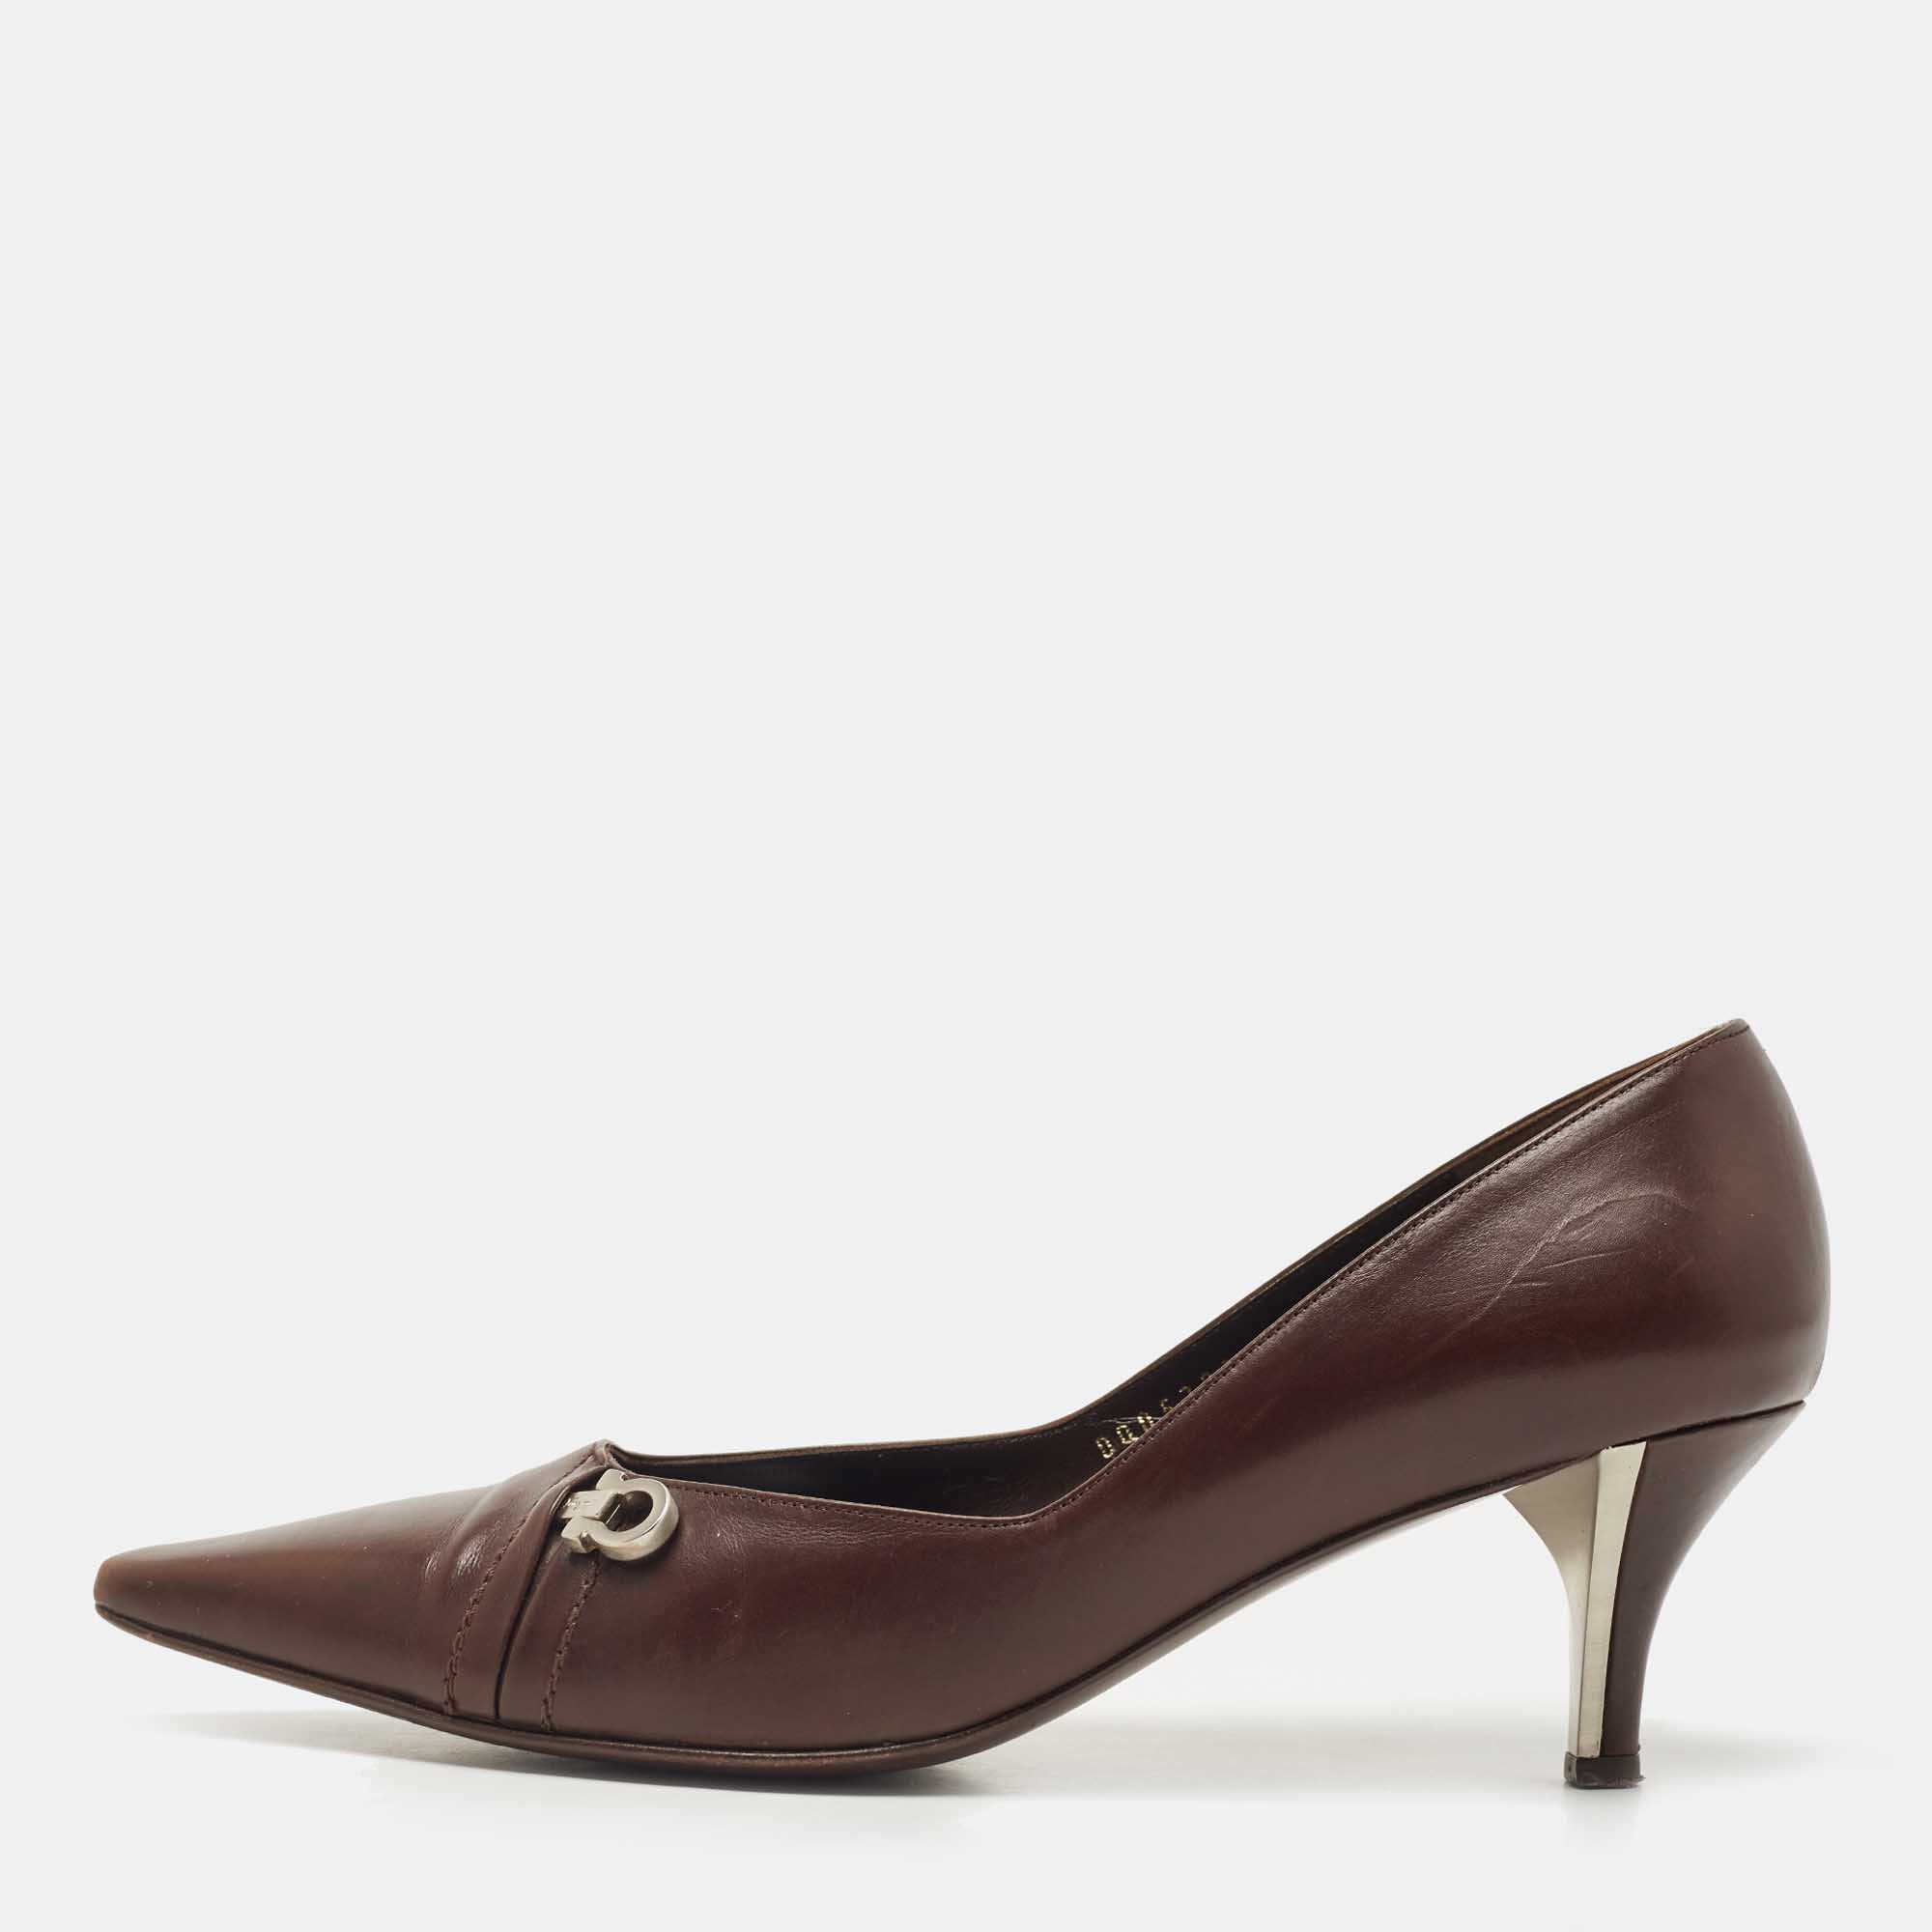 Pre-owned Ferragamo Brown Leather Gancio Pointed Toe Pumps Size 39.5